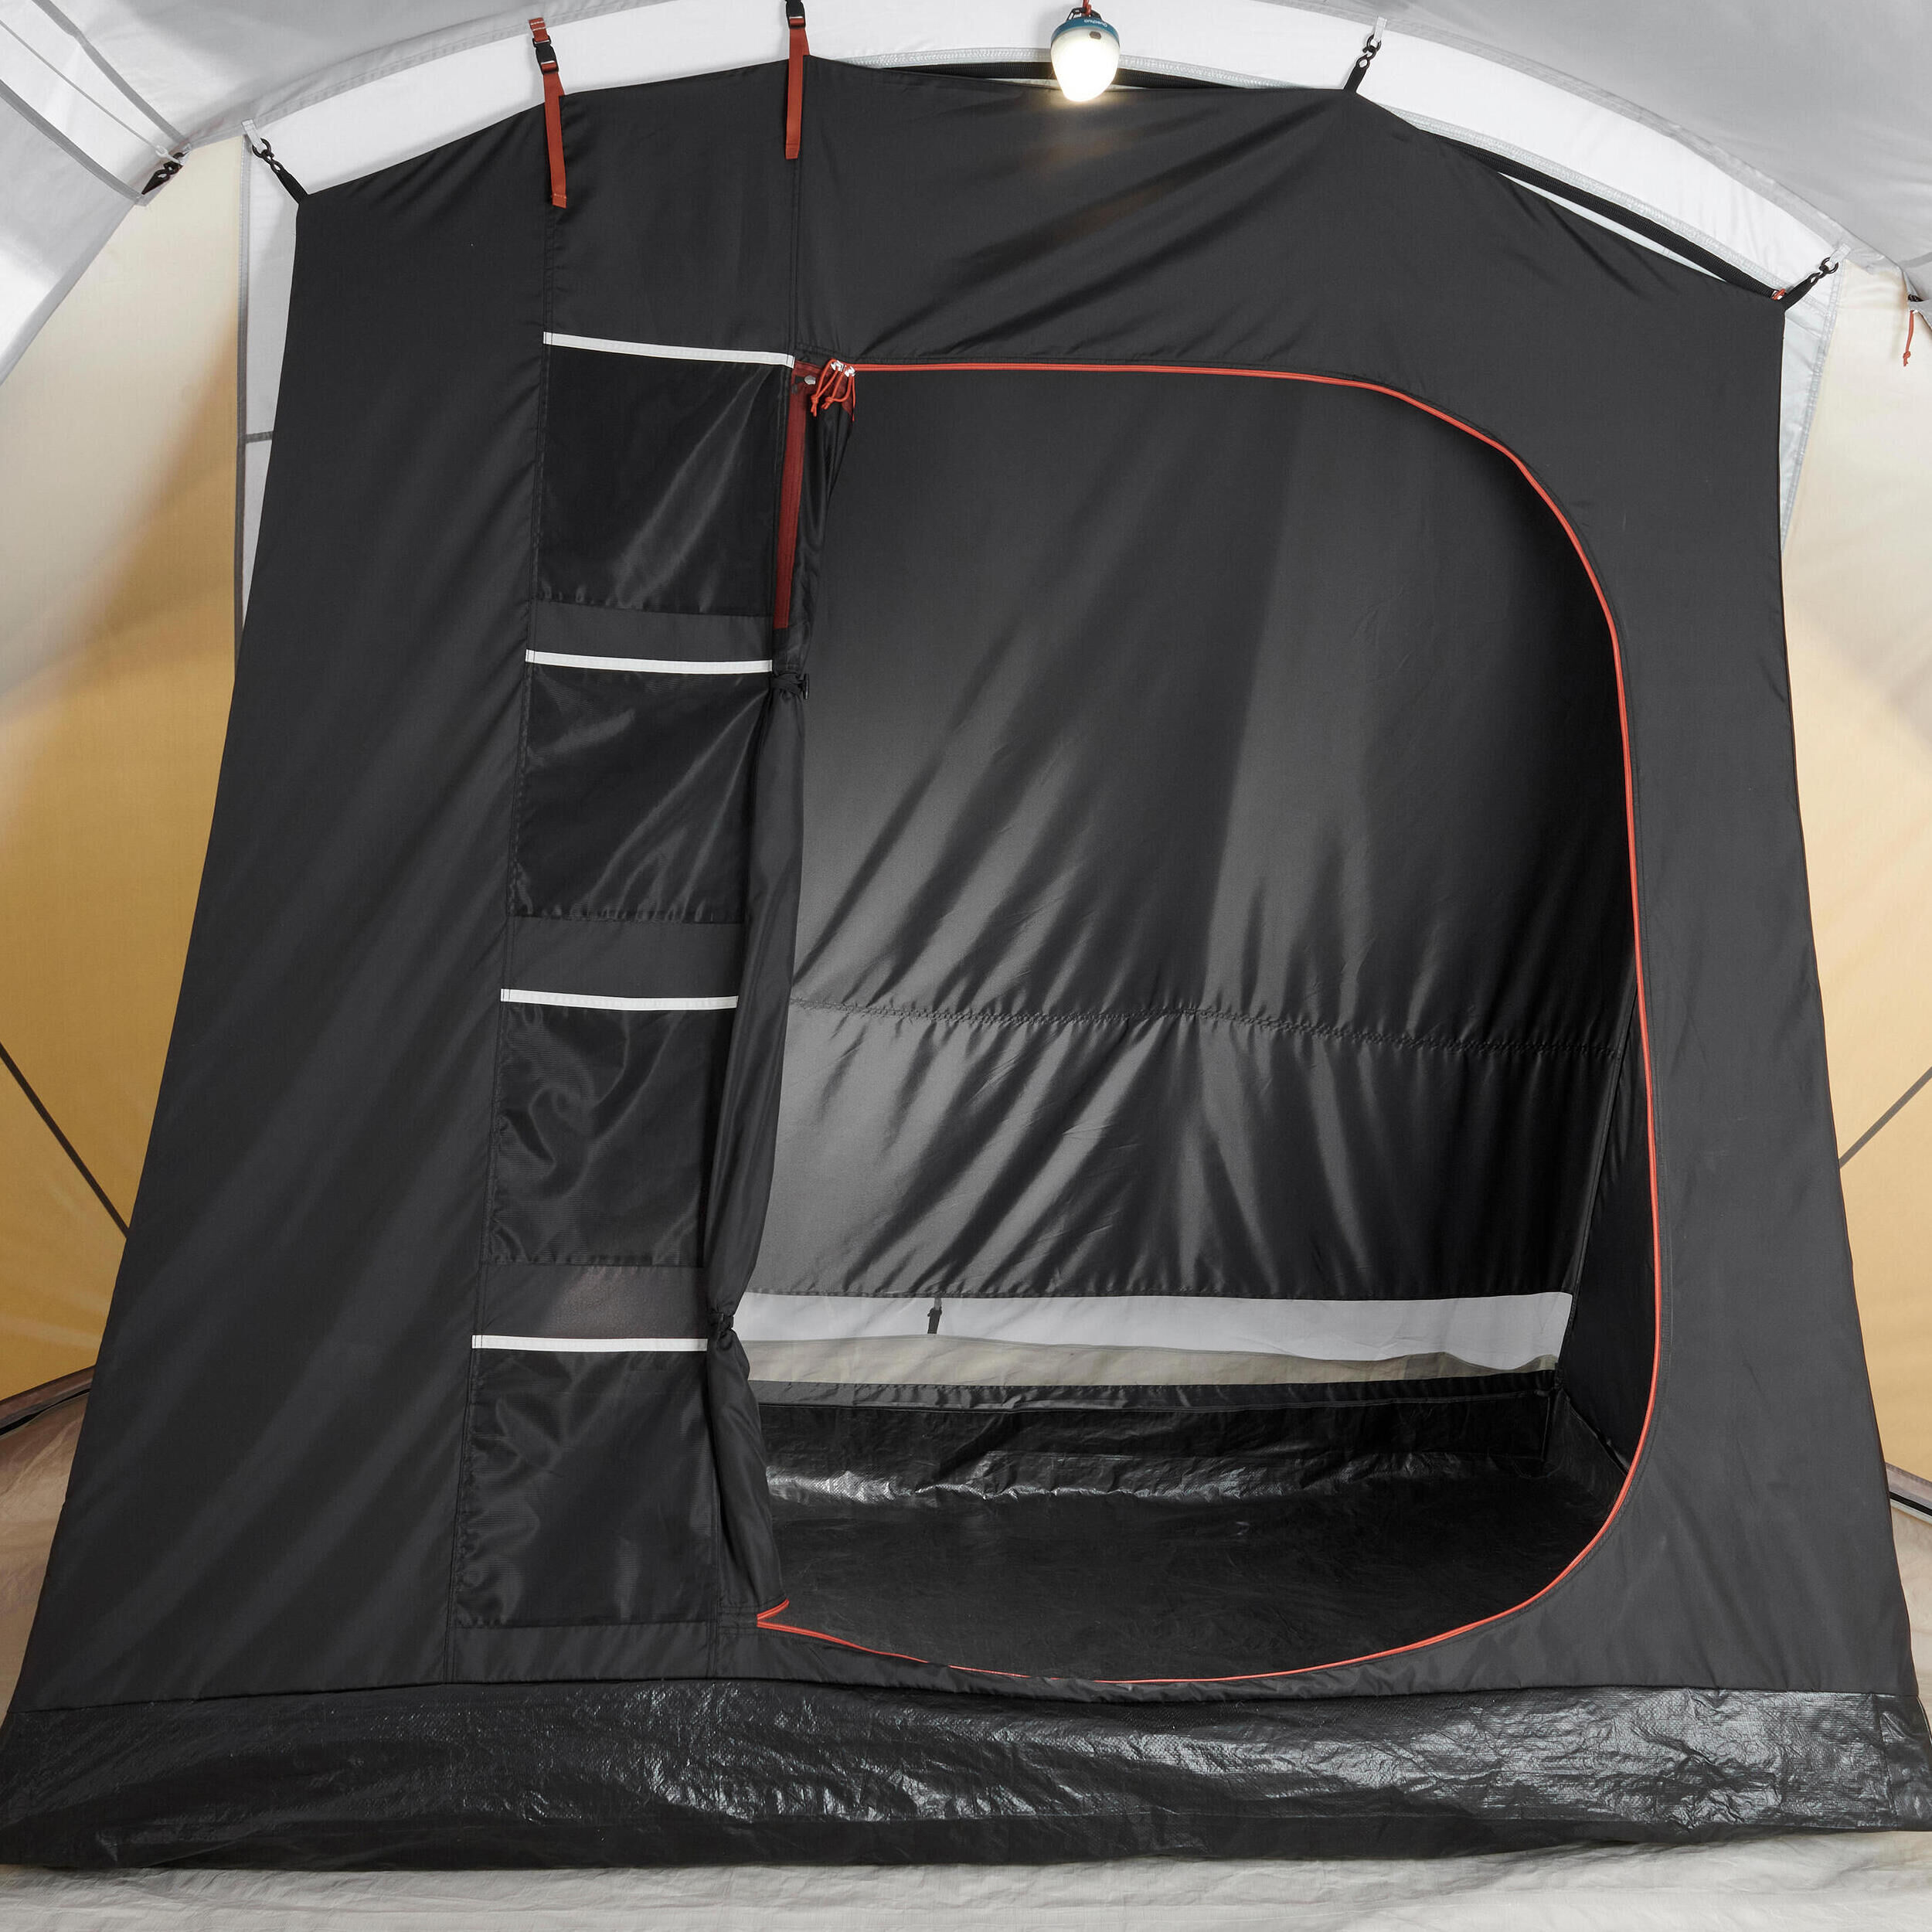 QUECHUA EXTRA BEDROOM - SPARE PART FOR THE AIR SECONDS 6.3 FRESH&BLACK TENT